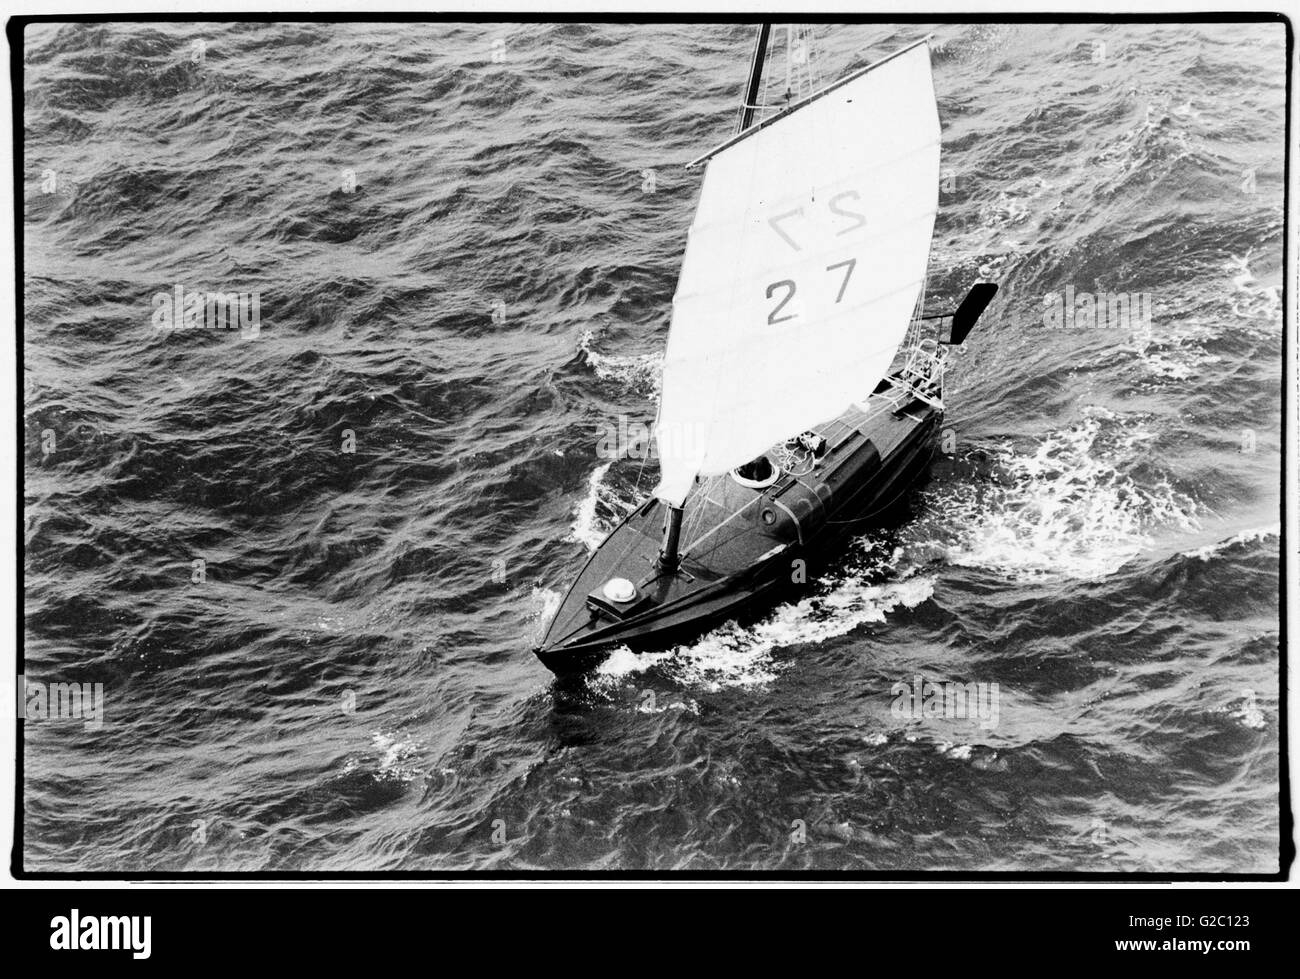 AJAX NEWS PHOTOS. 1980. PLYMOUTH,ENGLAND. - OSTAR START - MIKE RITCHIE SAILING JESTER, ONE OF THE SMALLEST YACHTS IN THE RACE TO NEWPORT R.I.  PHOTO:JONATHAN EASTLAND/AJAX REF:HDD/80/OSTAR/JESTER Stock Photo